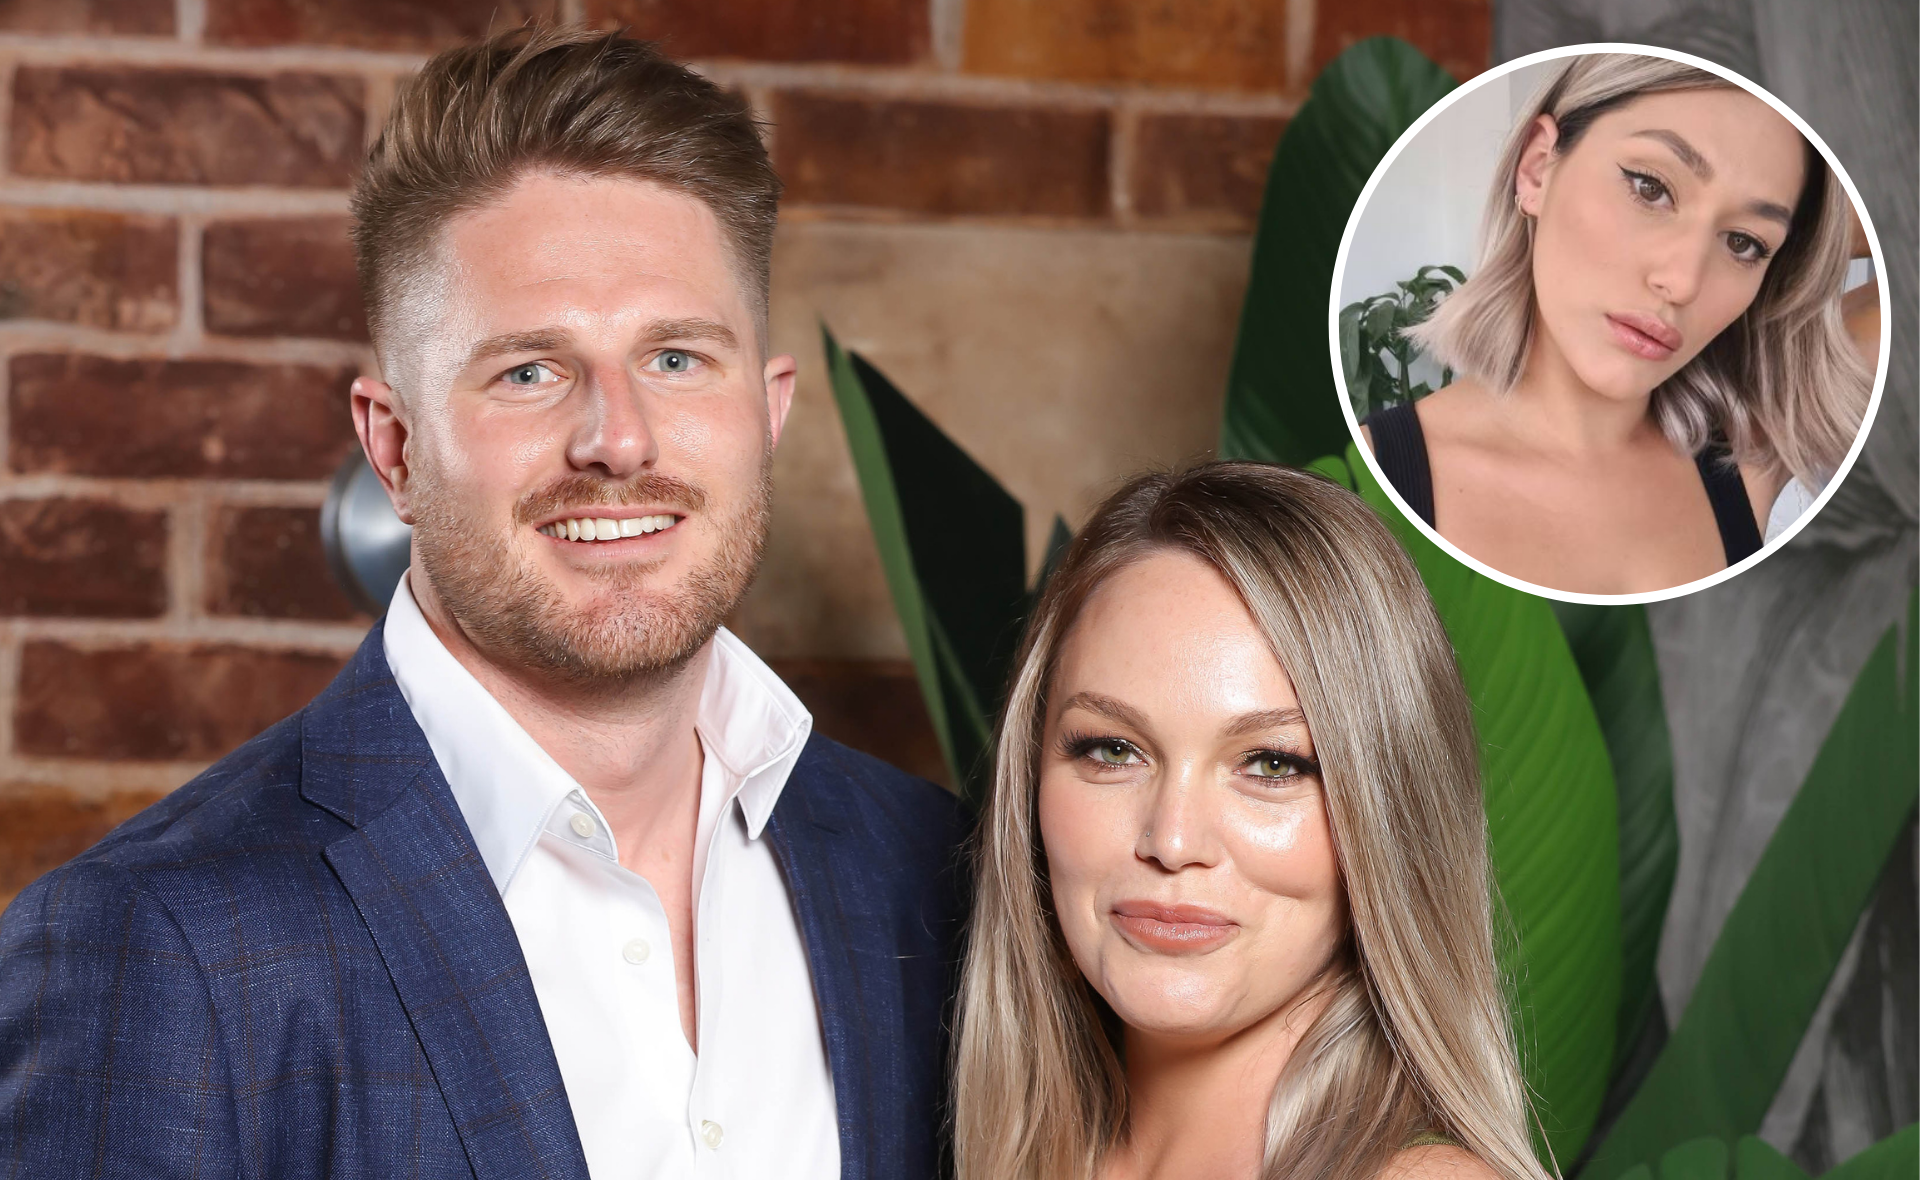 EXCLUSIVE: The shocking texts Married at First Sight’s Bryce Ruthven tried to hide… with a former bride